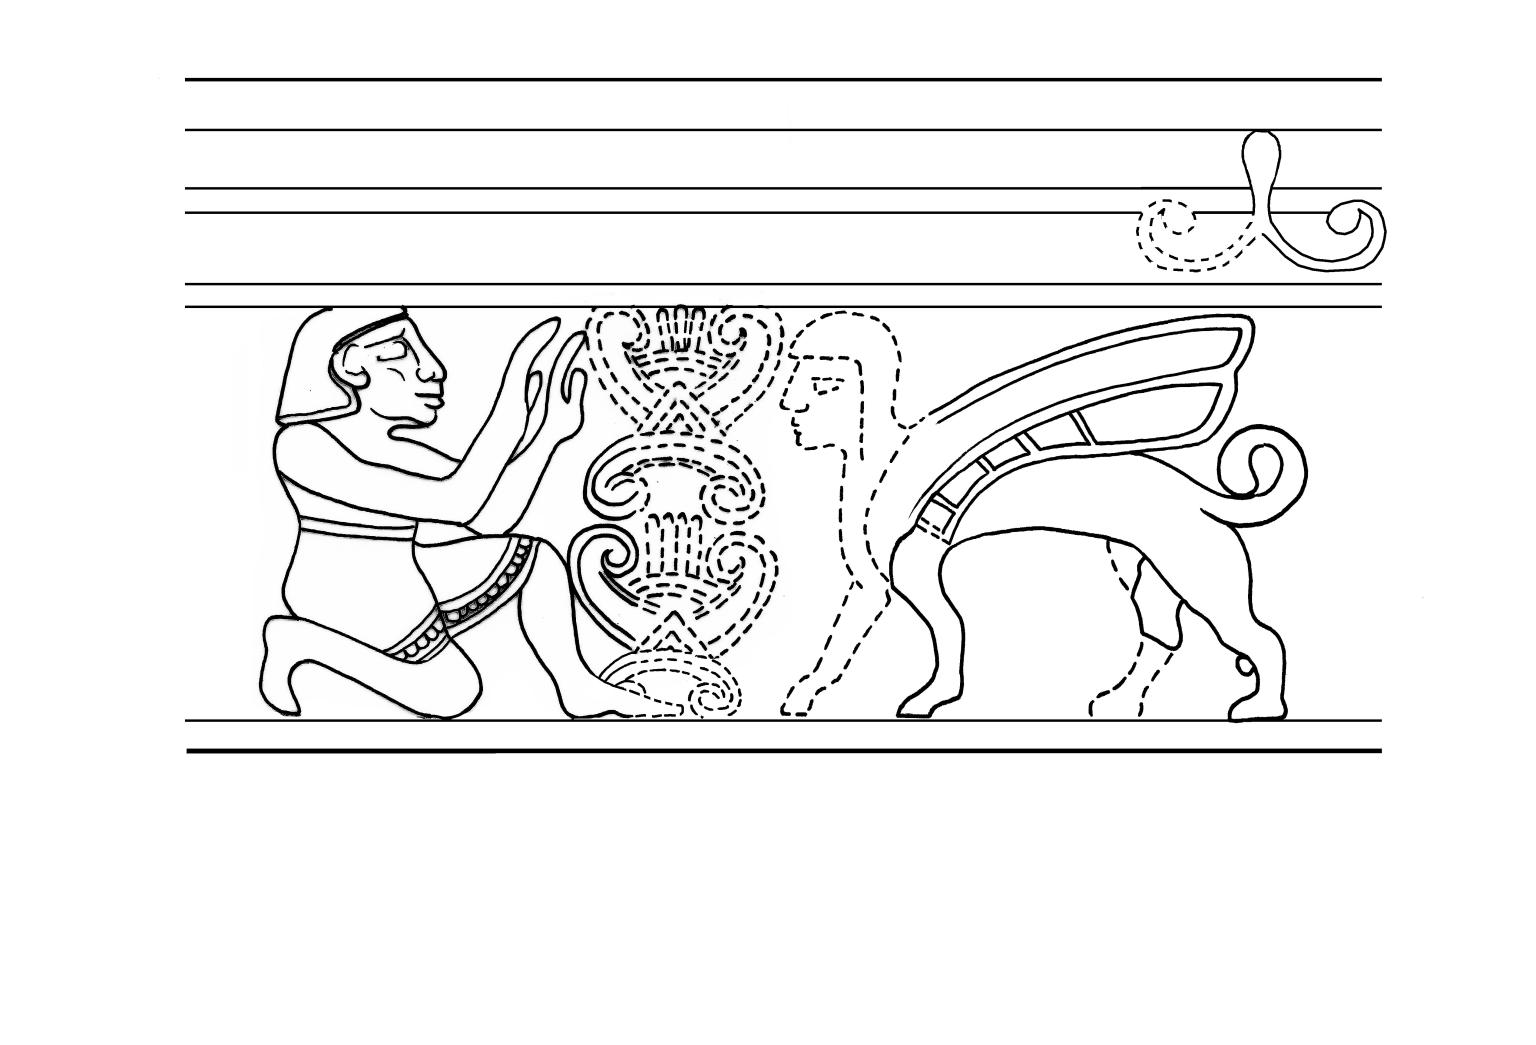 Drawing of figure crouched down next to central altar and winged sphinx, under set of parallel lines.